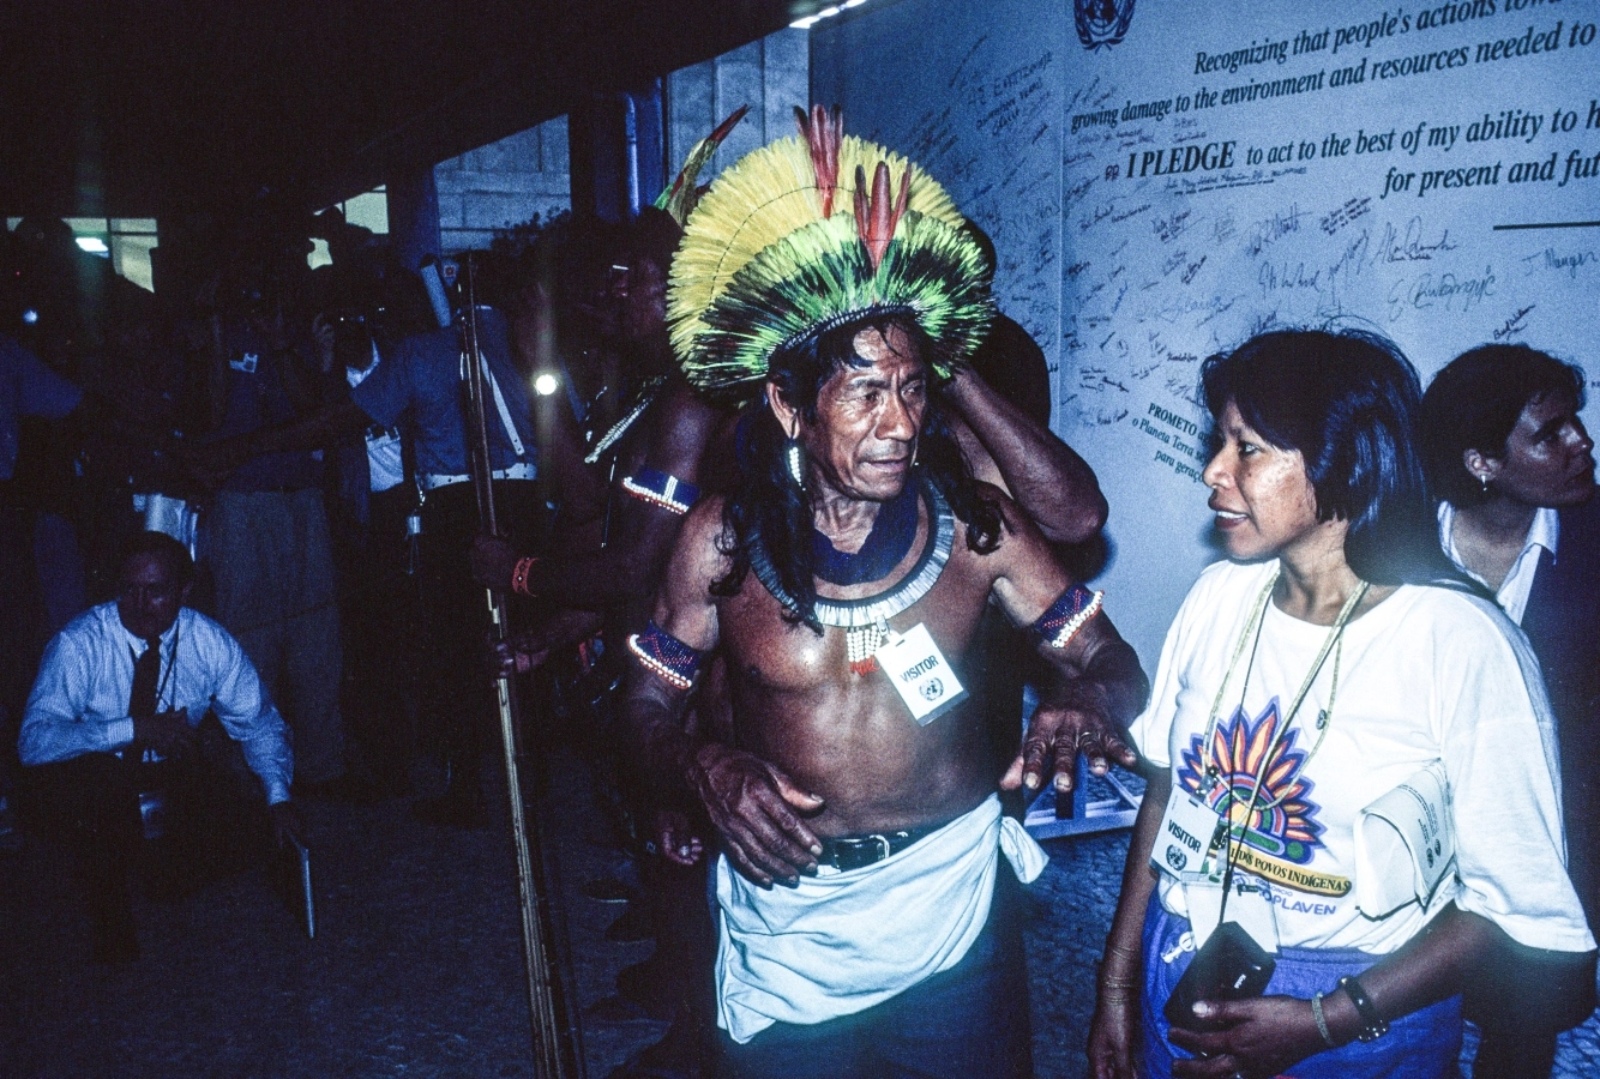 Indigenous environmentalist Raoni Metuktire, a chief of the Kayapo people in Brazil, talks to a participant at the 1992 UN Earth Summit in Rio.